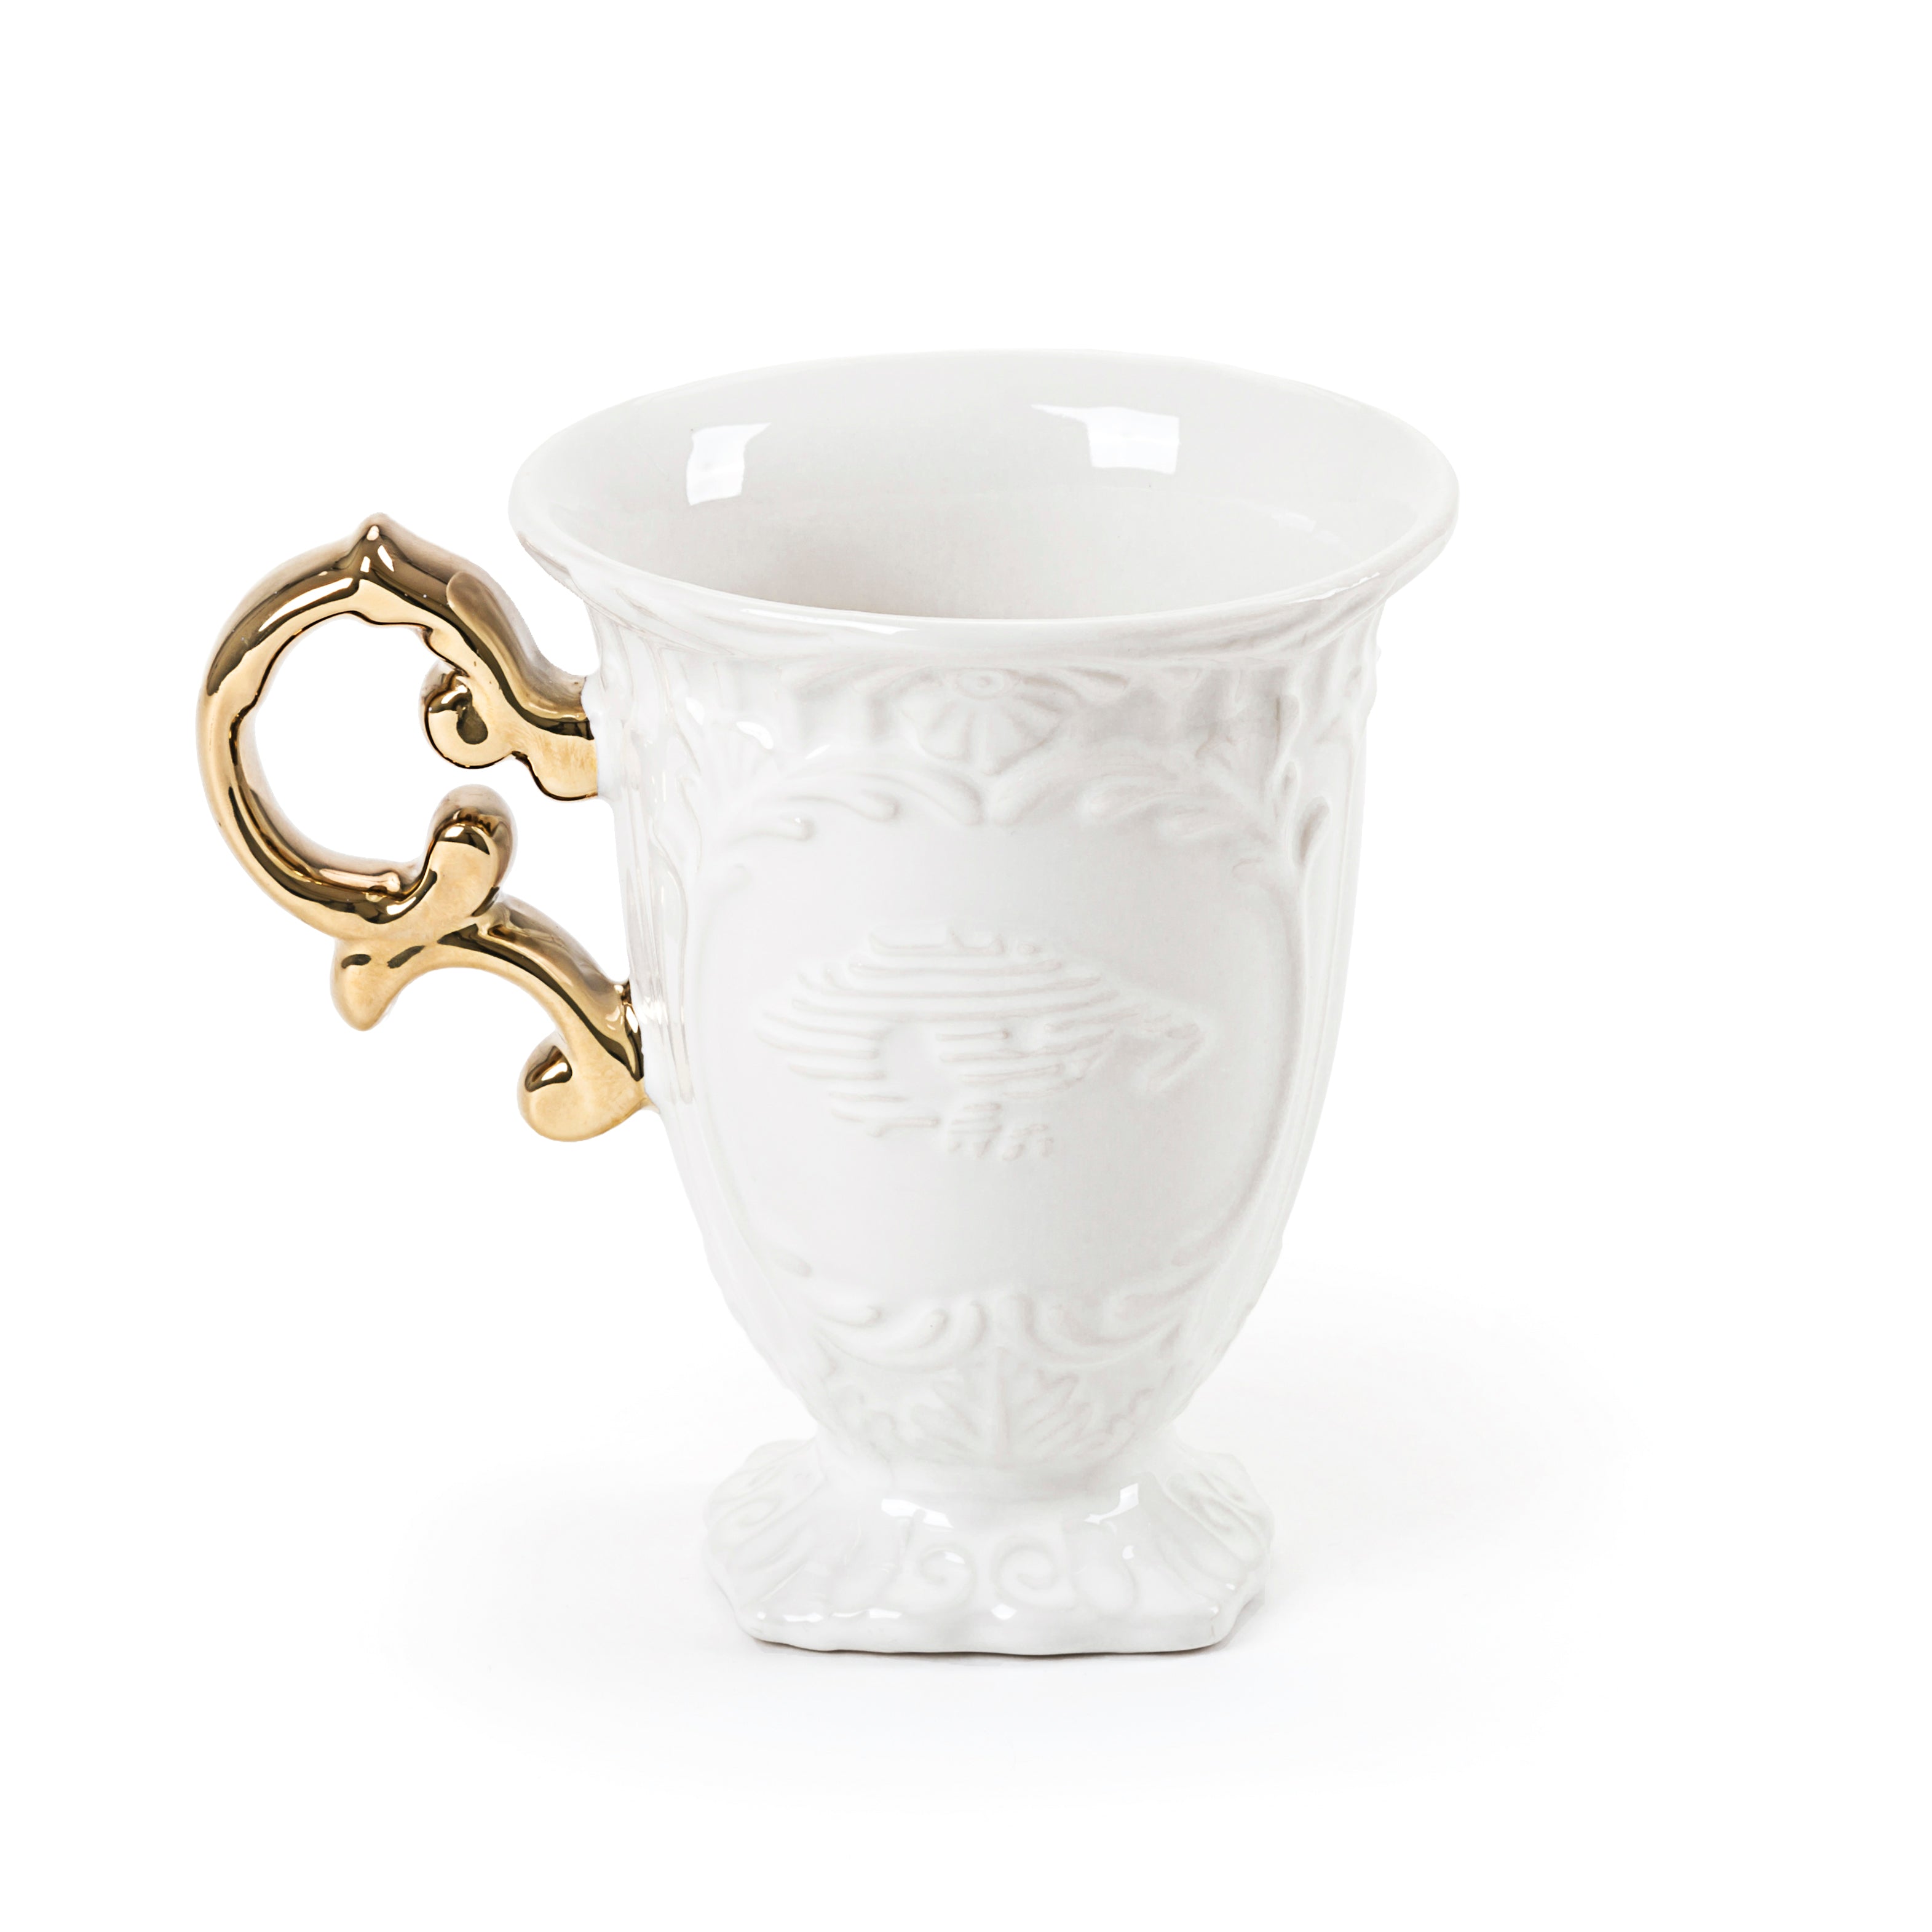 Seletti Wares Gold Wares-I mug with Gold handle in porcelain